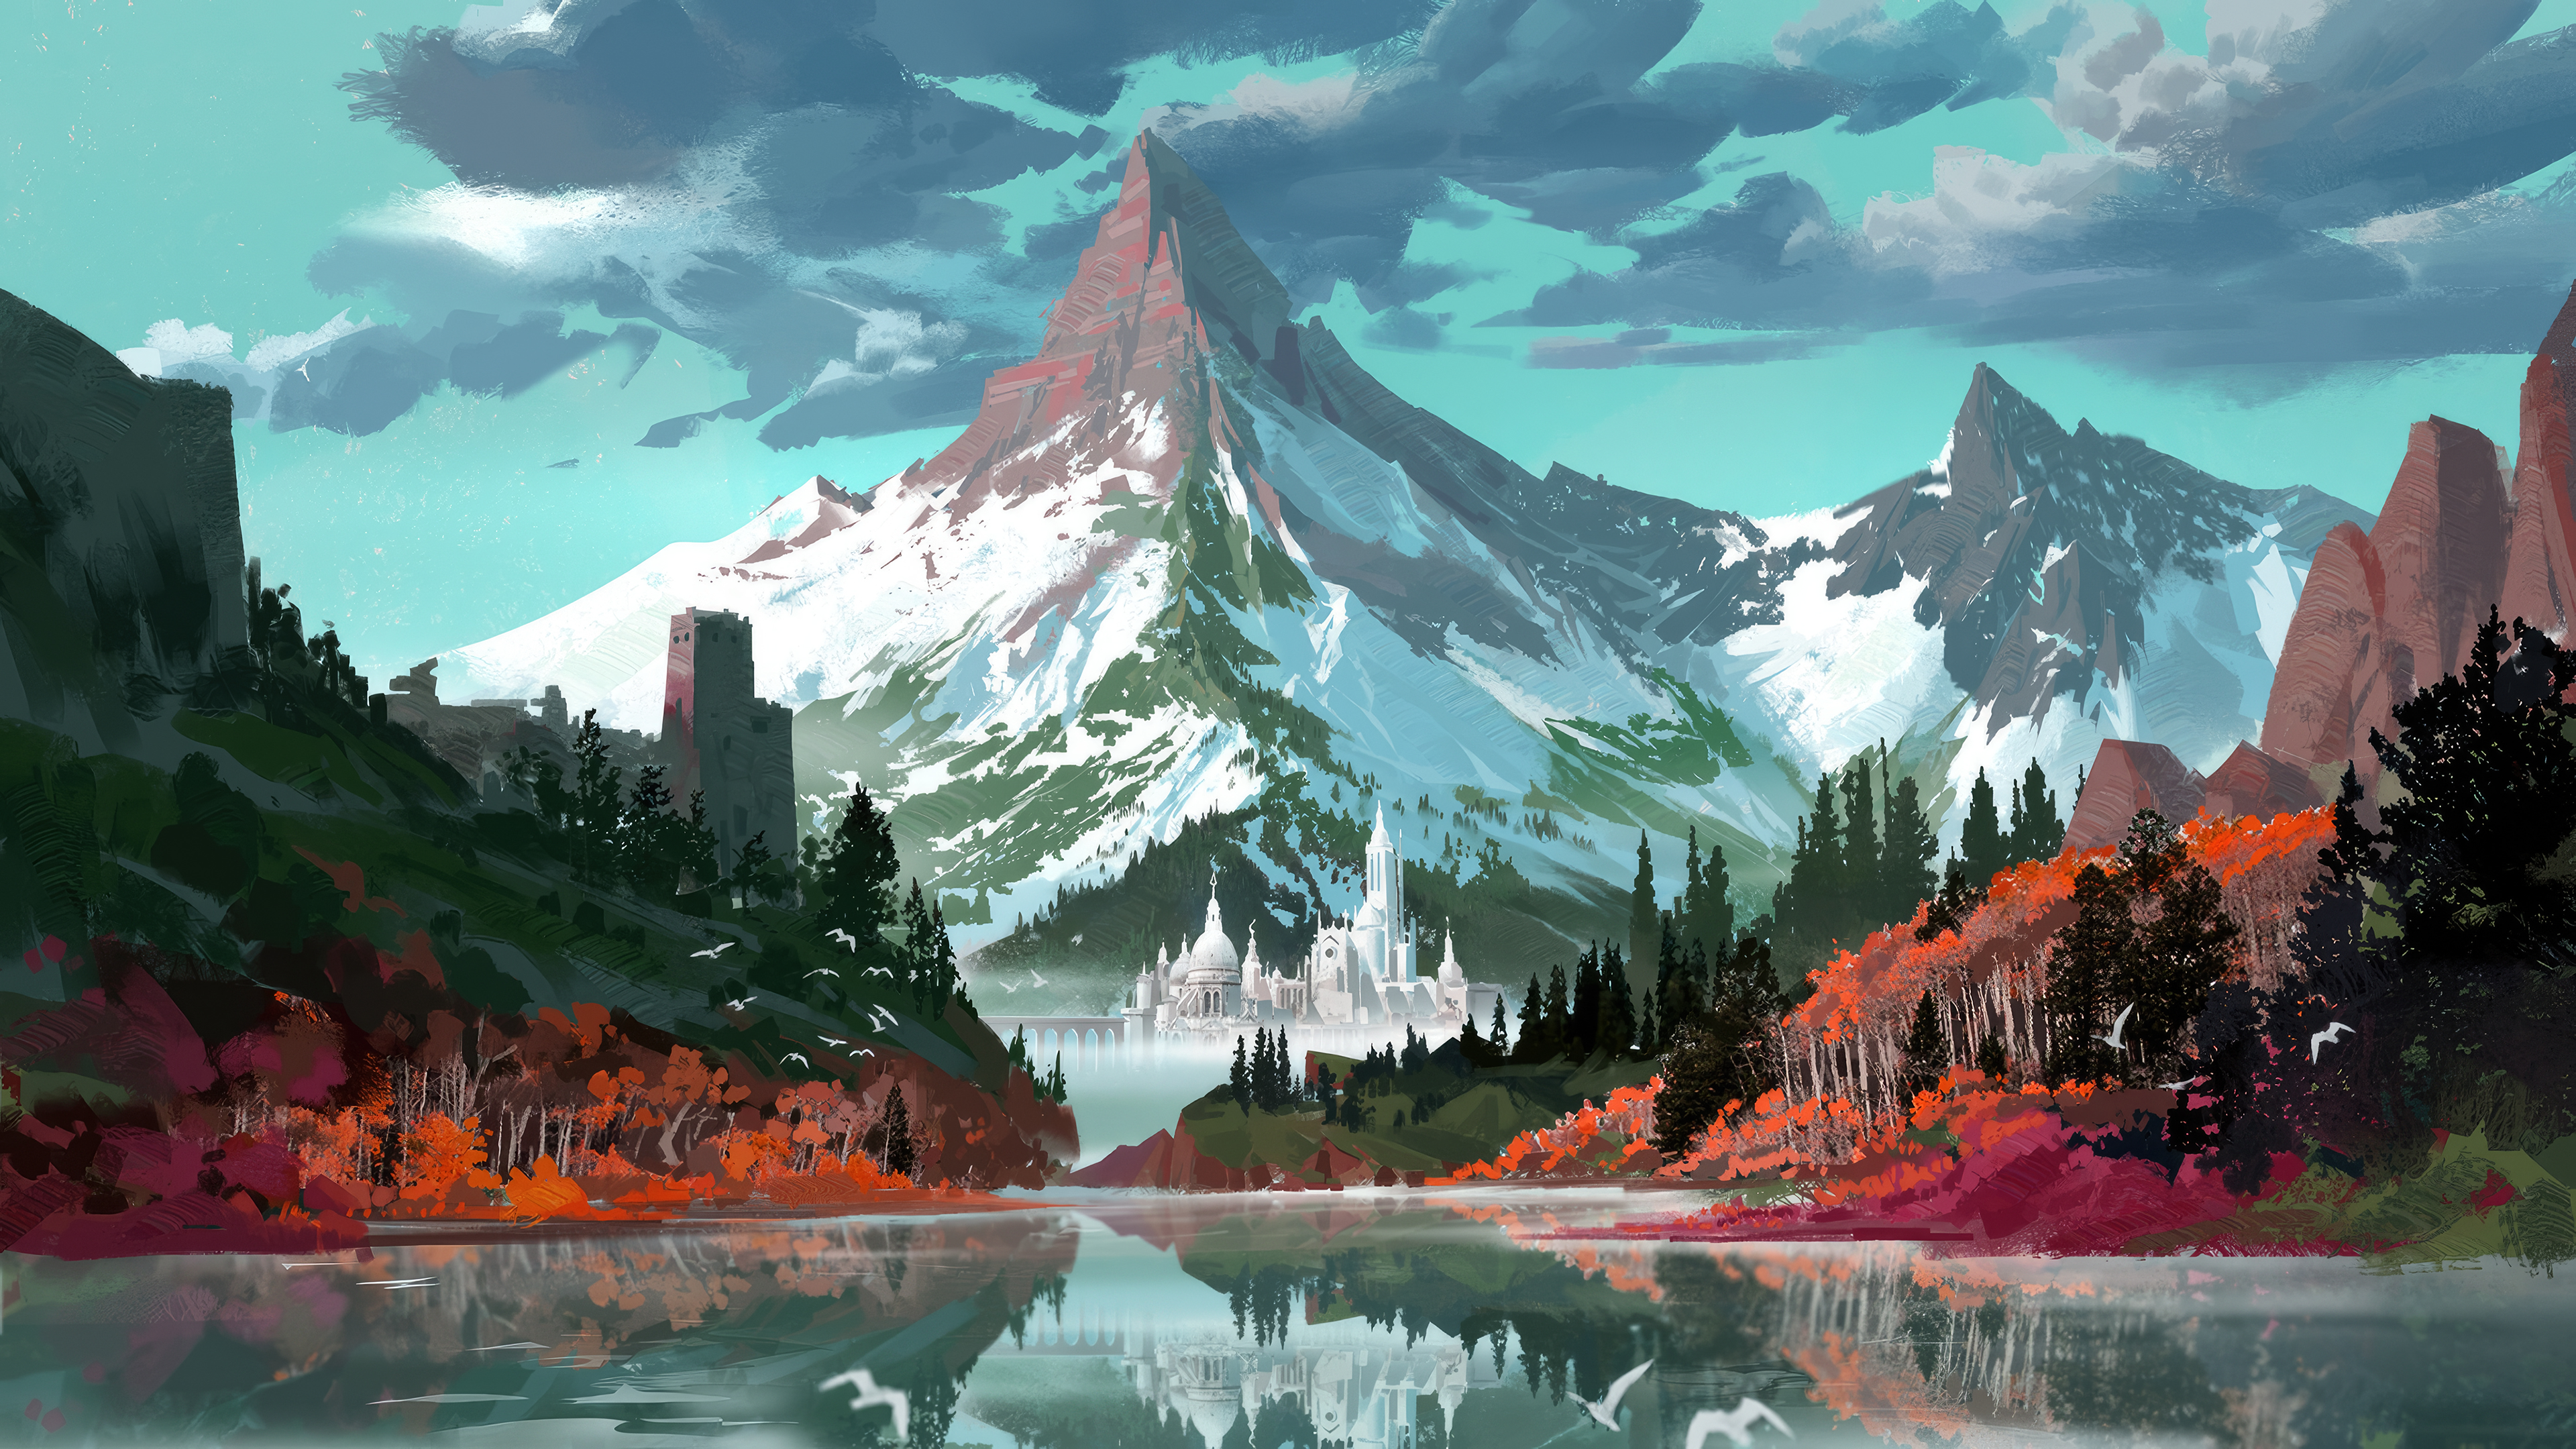 General 3840x2160 digital painting digital art mountains lake forest clouds fall castle ruins reflection water sky snow trees nature